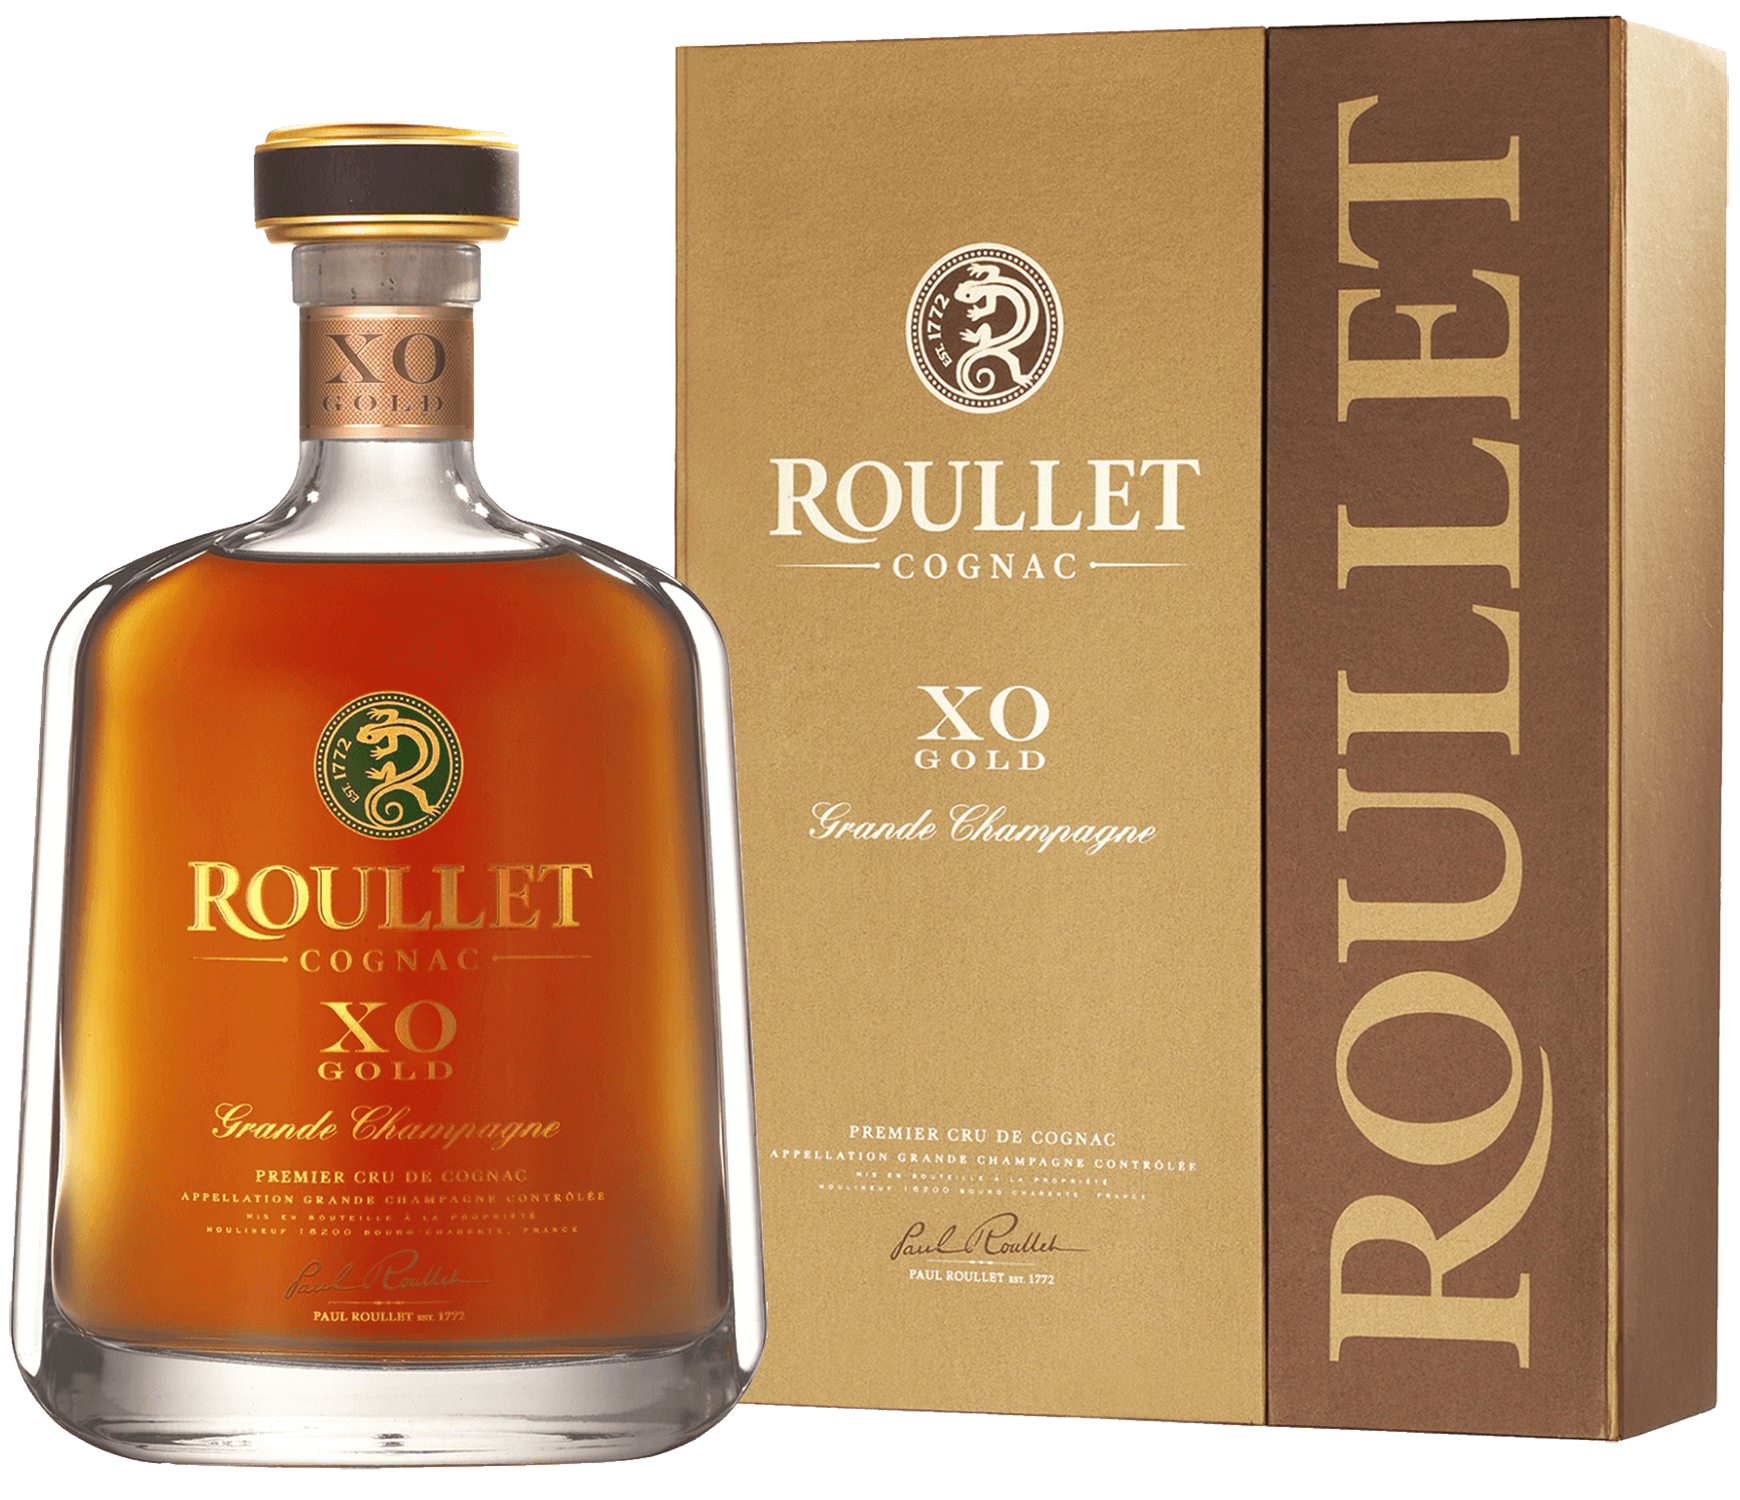 Roullet Cognac XO Gold Grande Champagne (gift box) meukow cognac xo grande champagne gift box